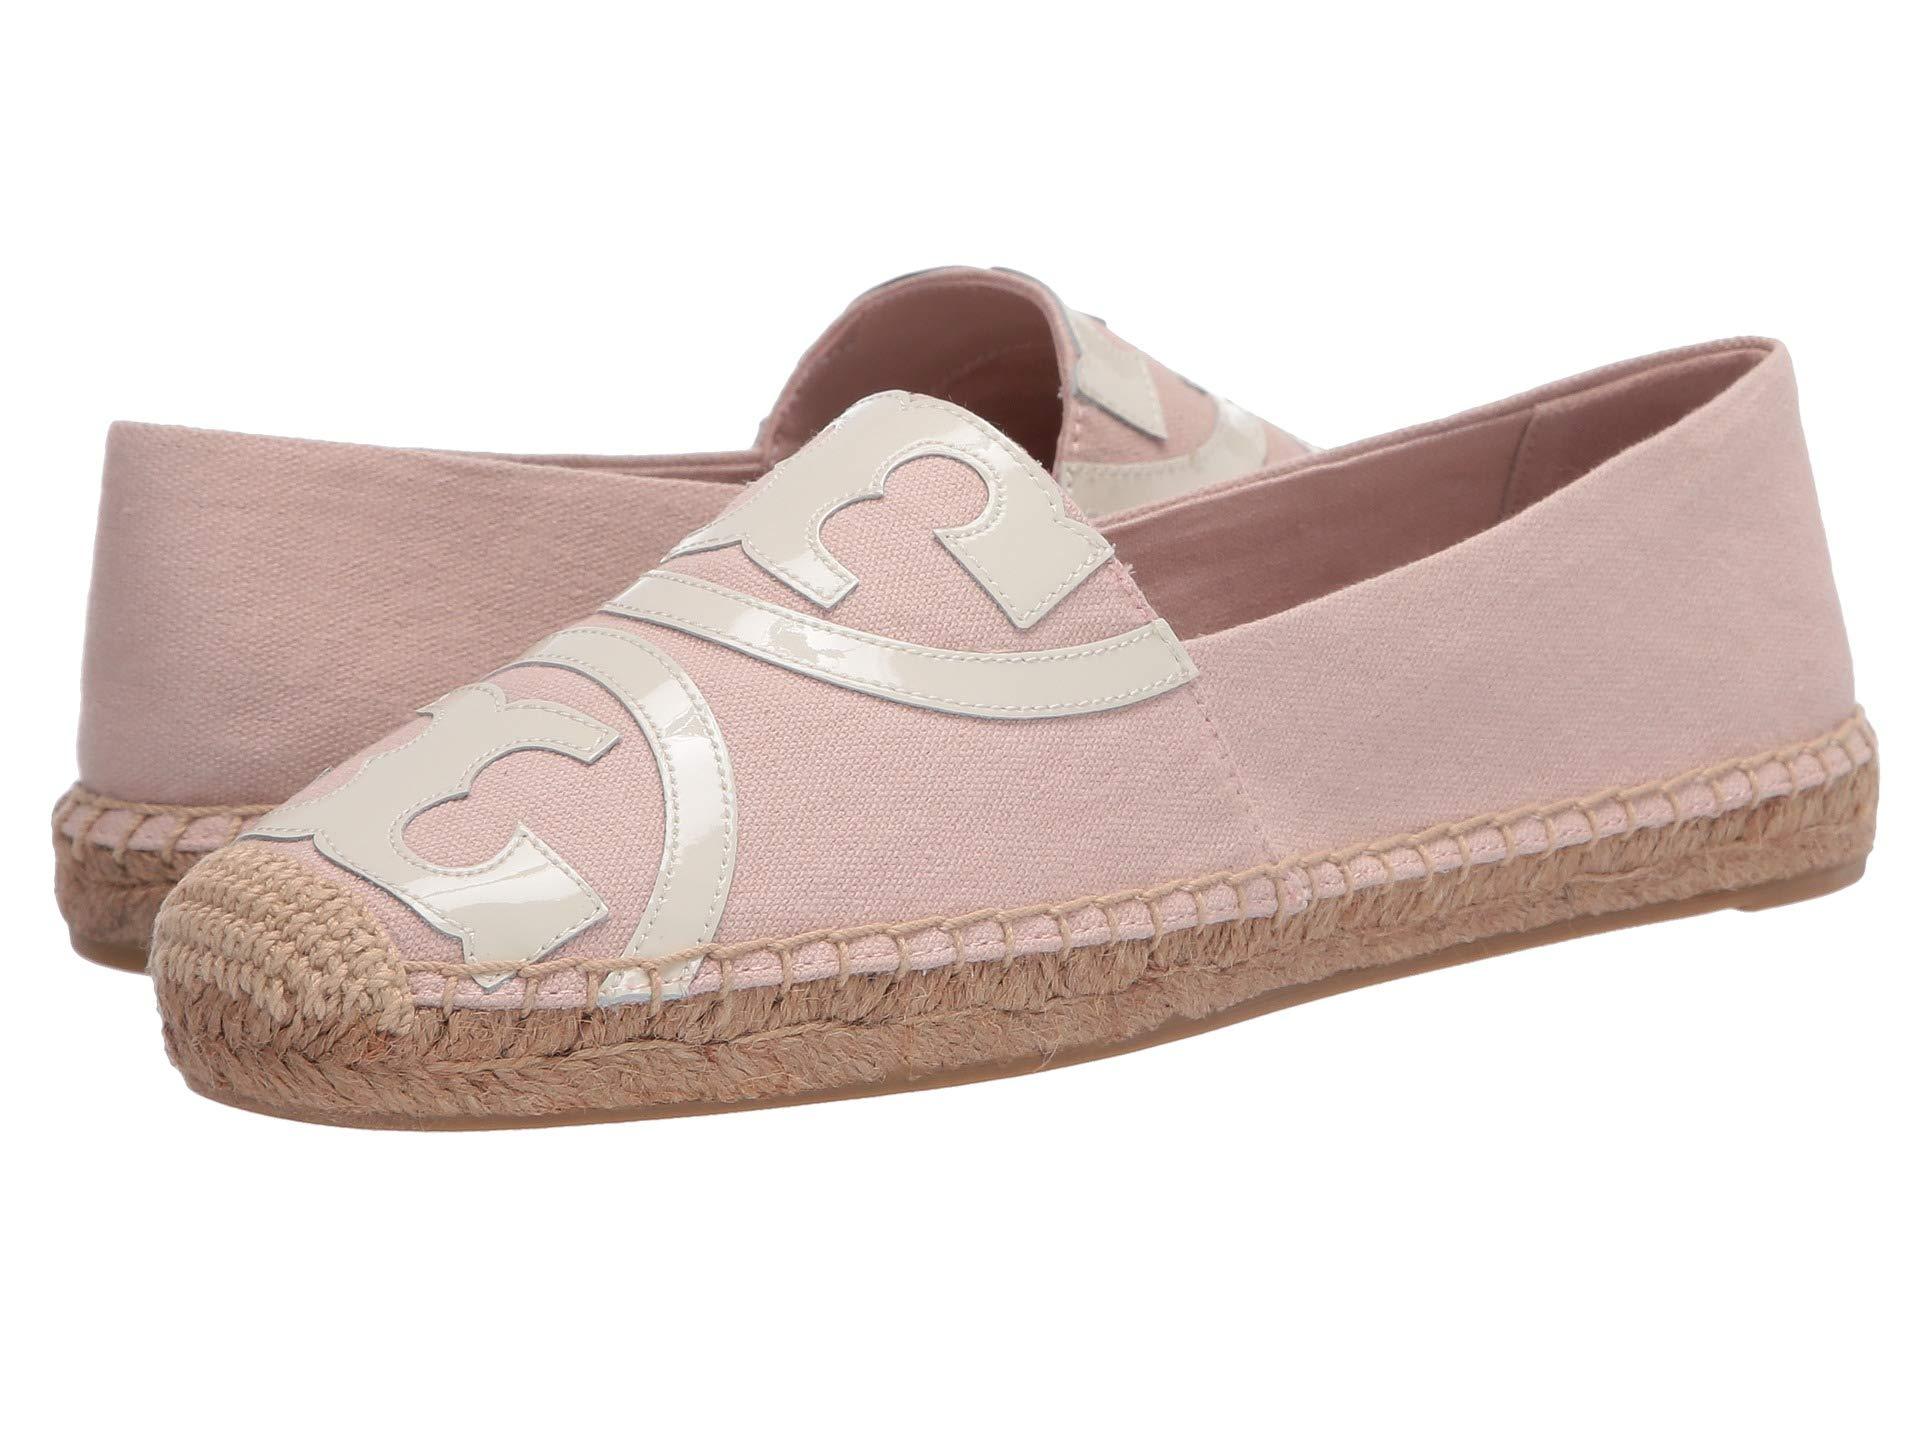 Tory Burch Poppy Canvas & Patent Espadrilles in Pink | Lyst